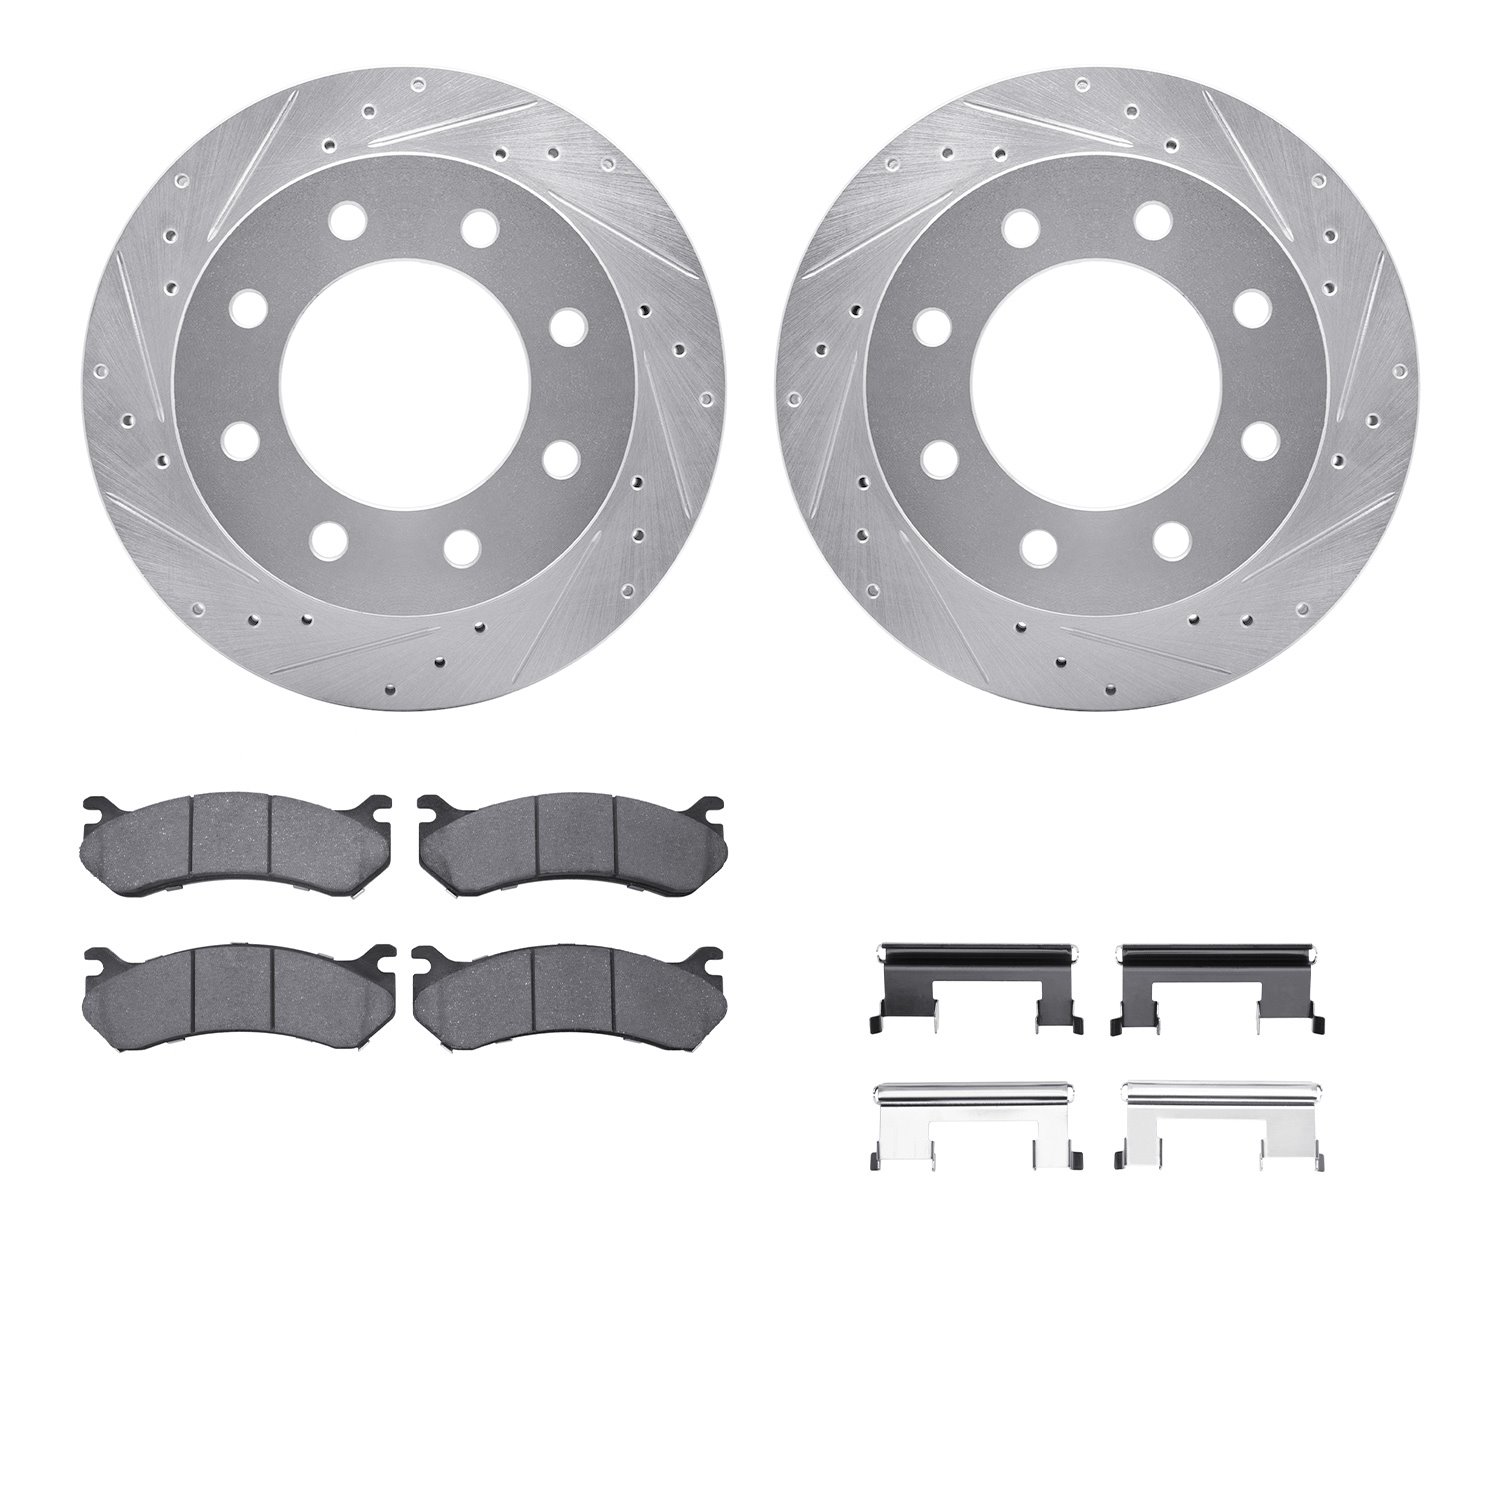 7412-48026 Drilled/Slotted Brake Rotors with Ultimate-Duty Brake Pads Kit & Hardware [Silver], 1999-2009 GM, Position: Rear